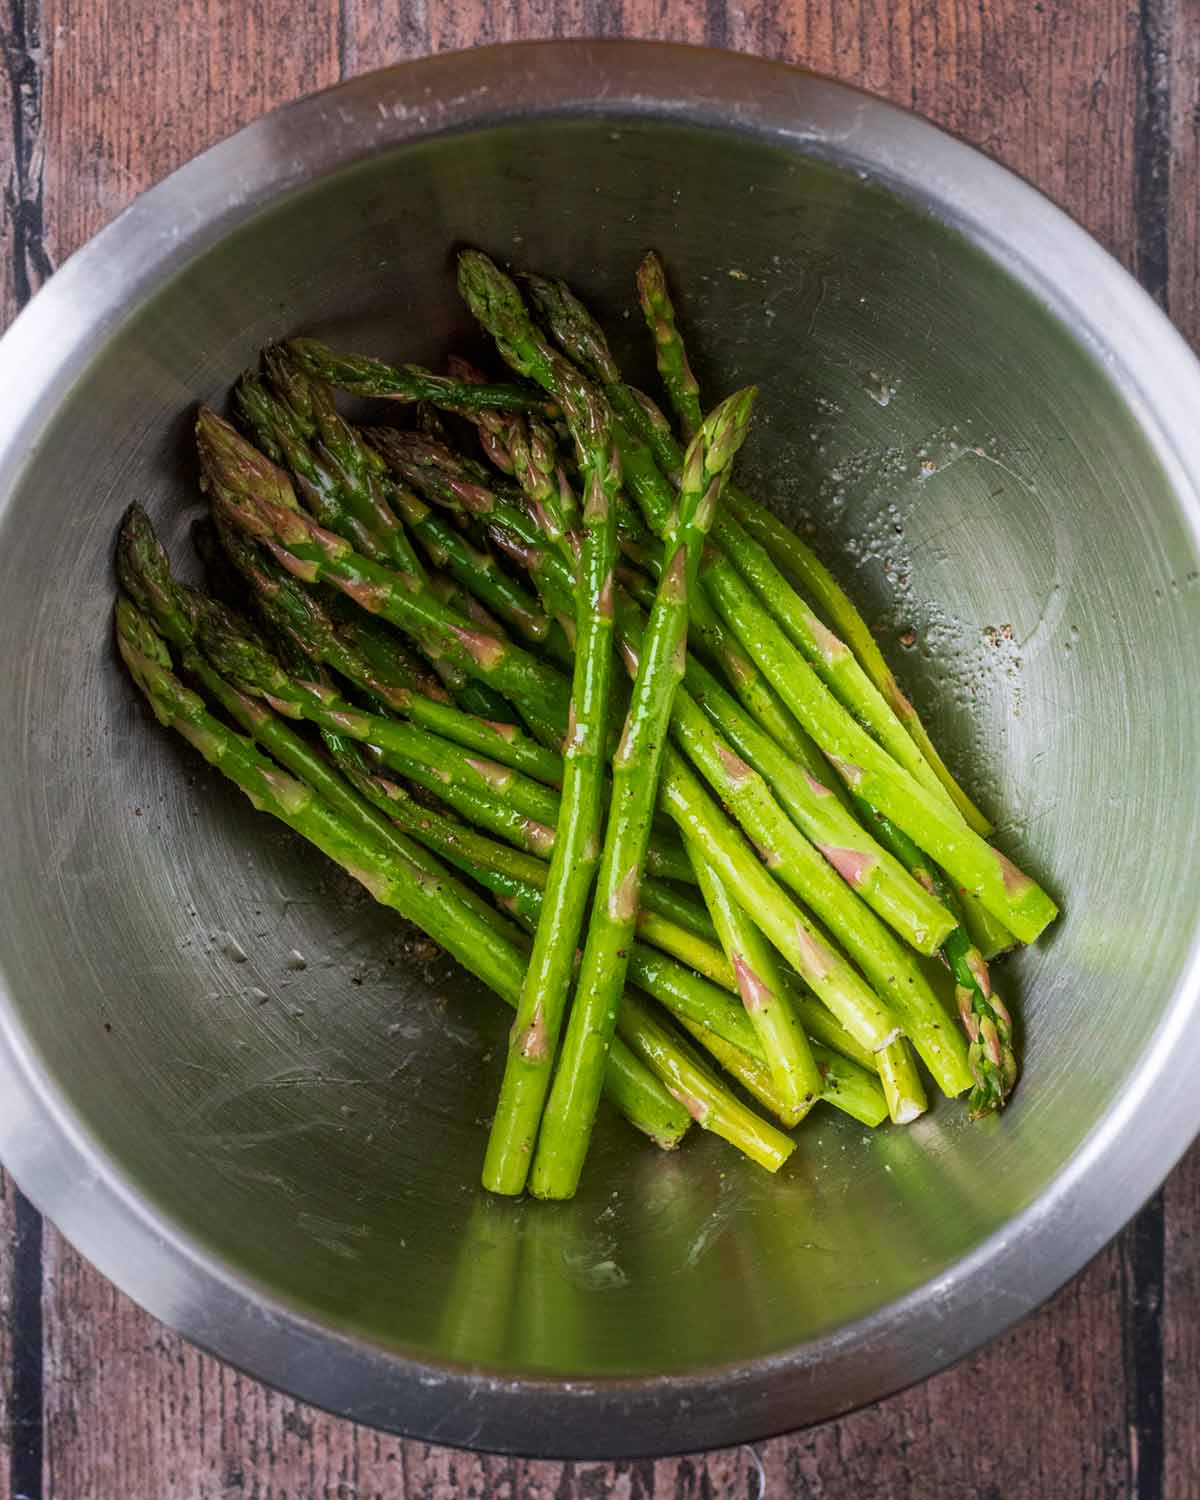 Asparagus spears in a bowl with oil, salt and pepper.